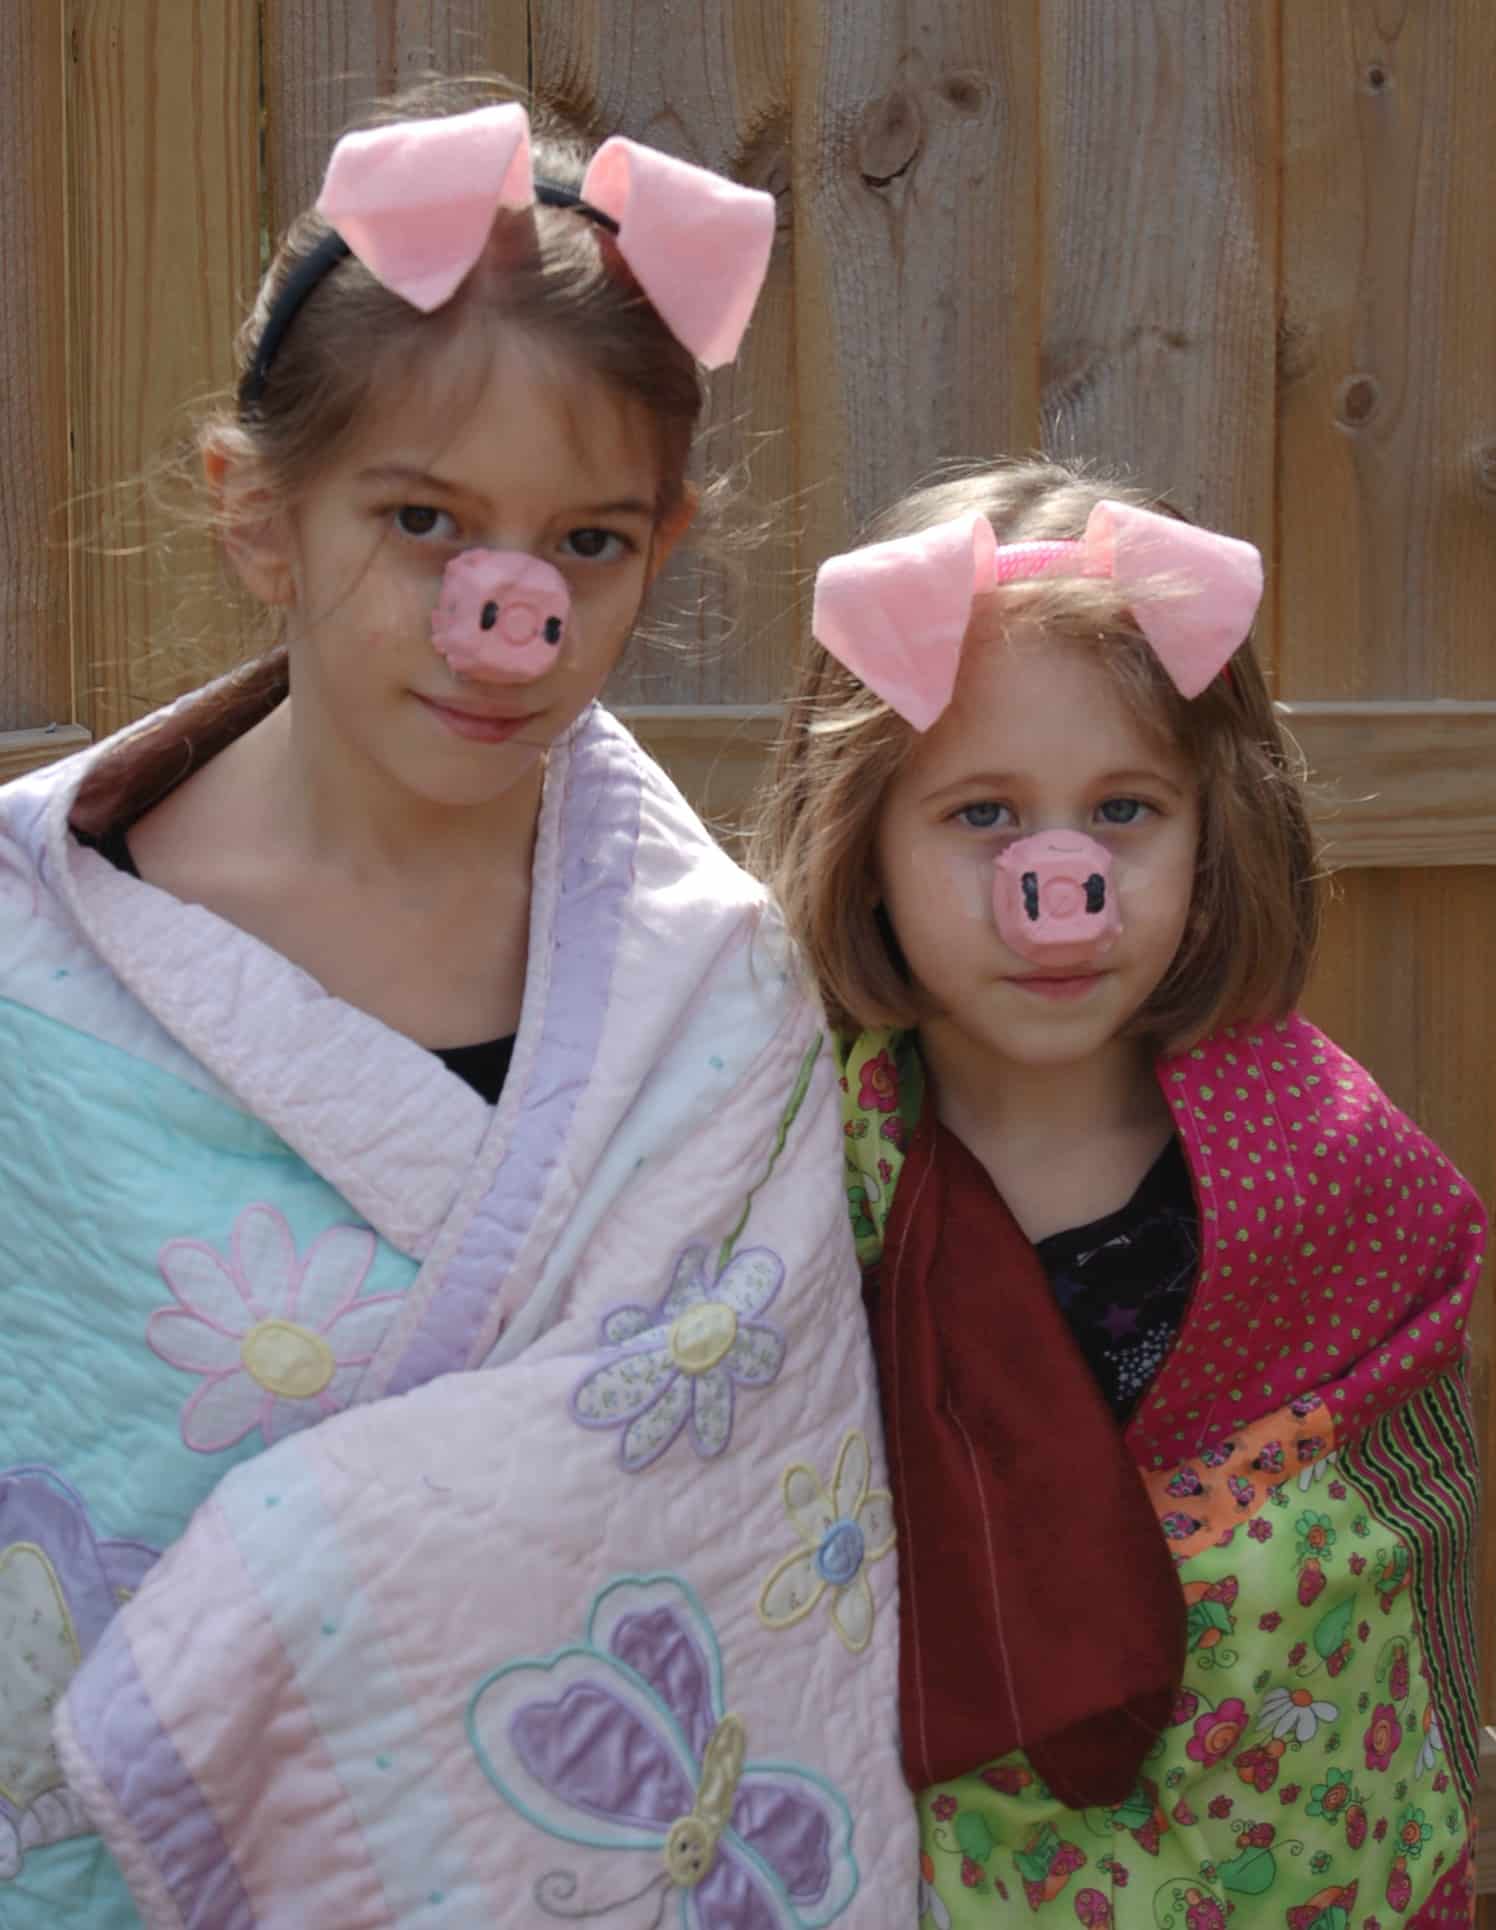 pig in a blanket costume